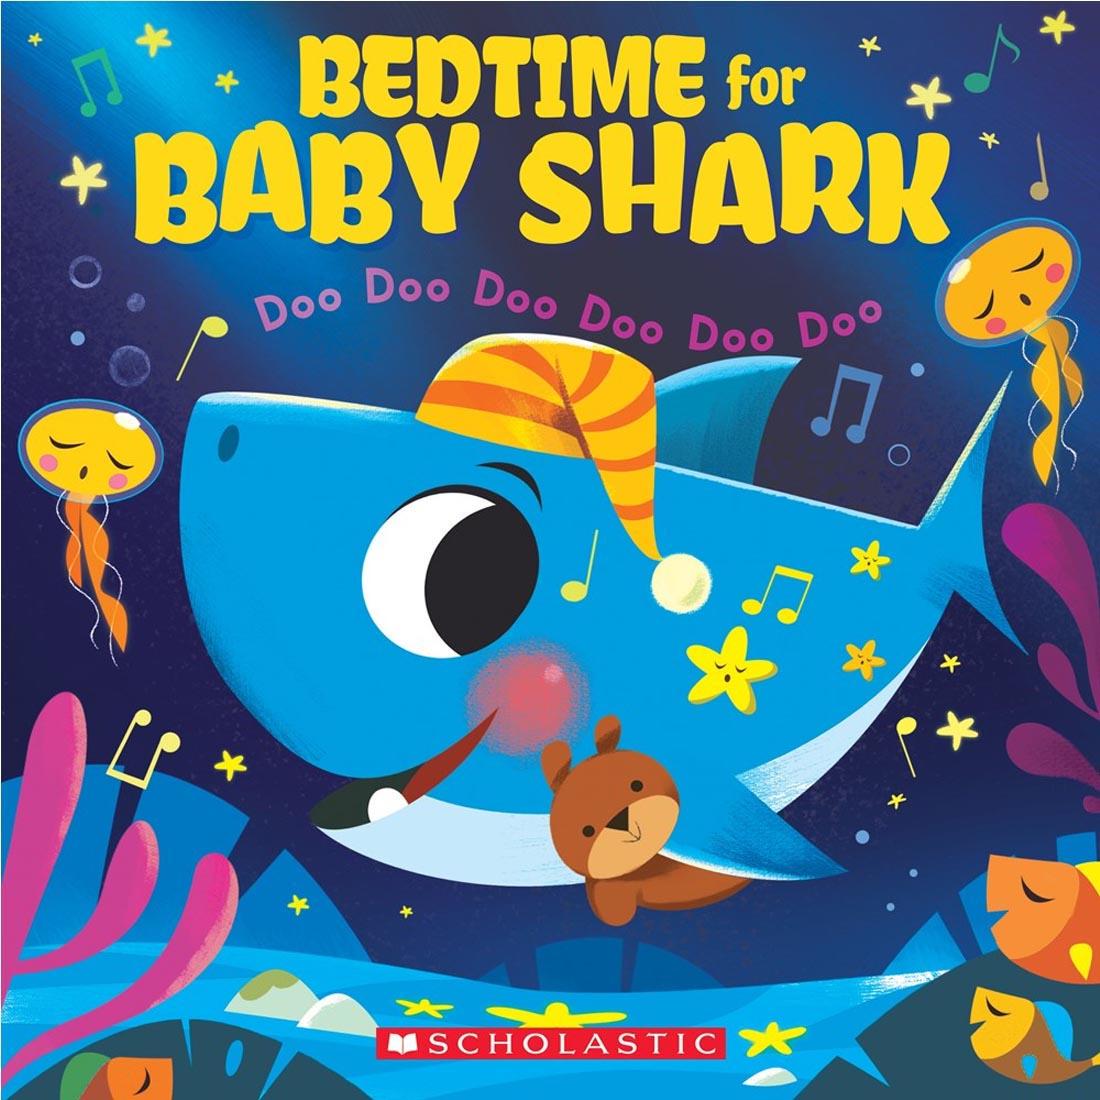 Bedtime For Baby Shark book by Scholastic